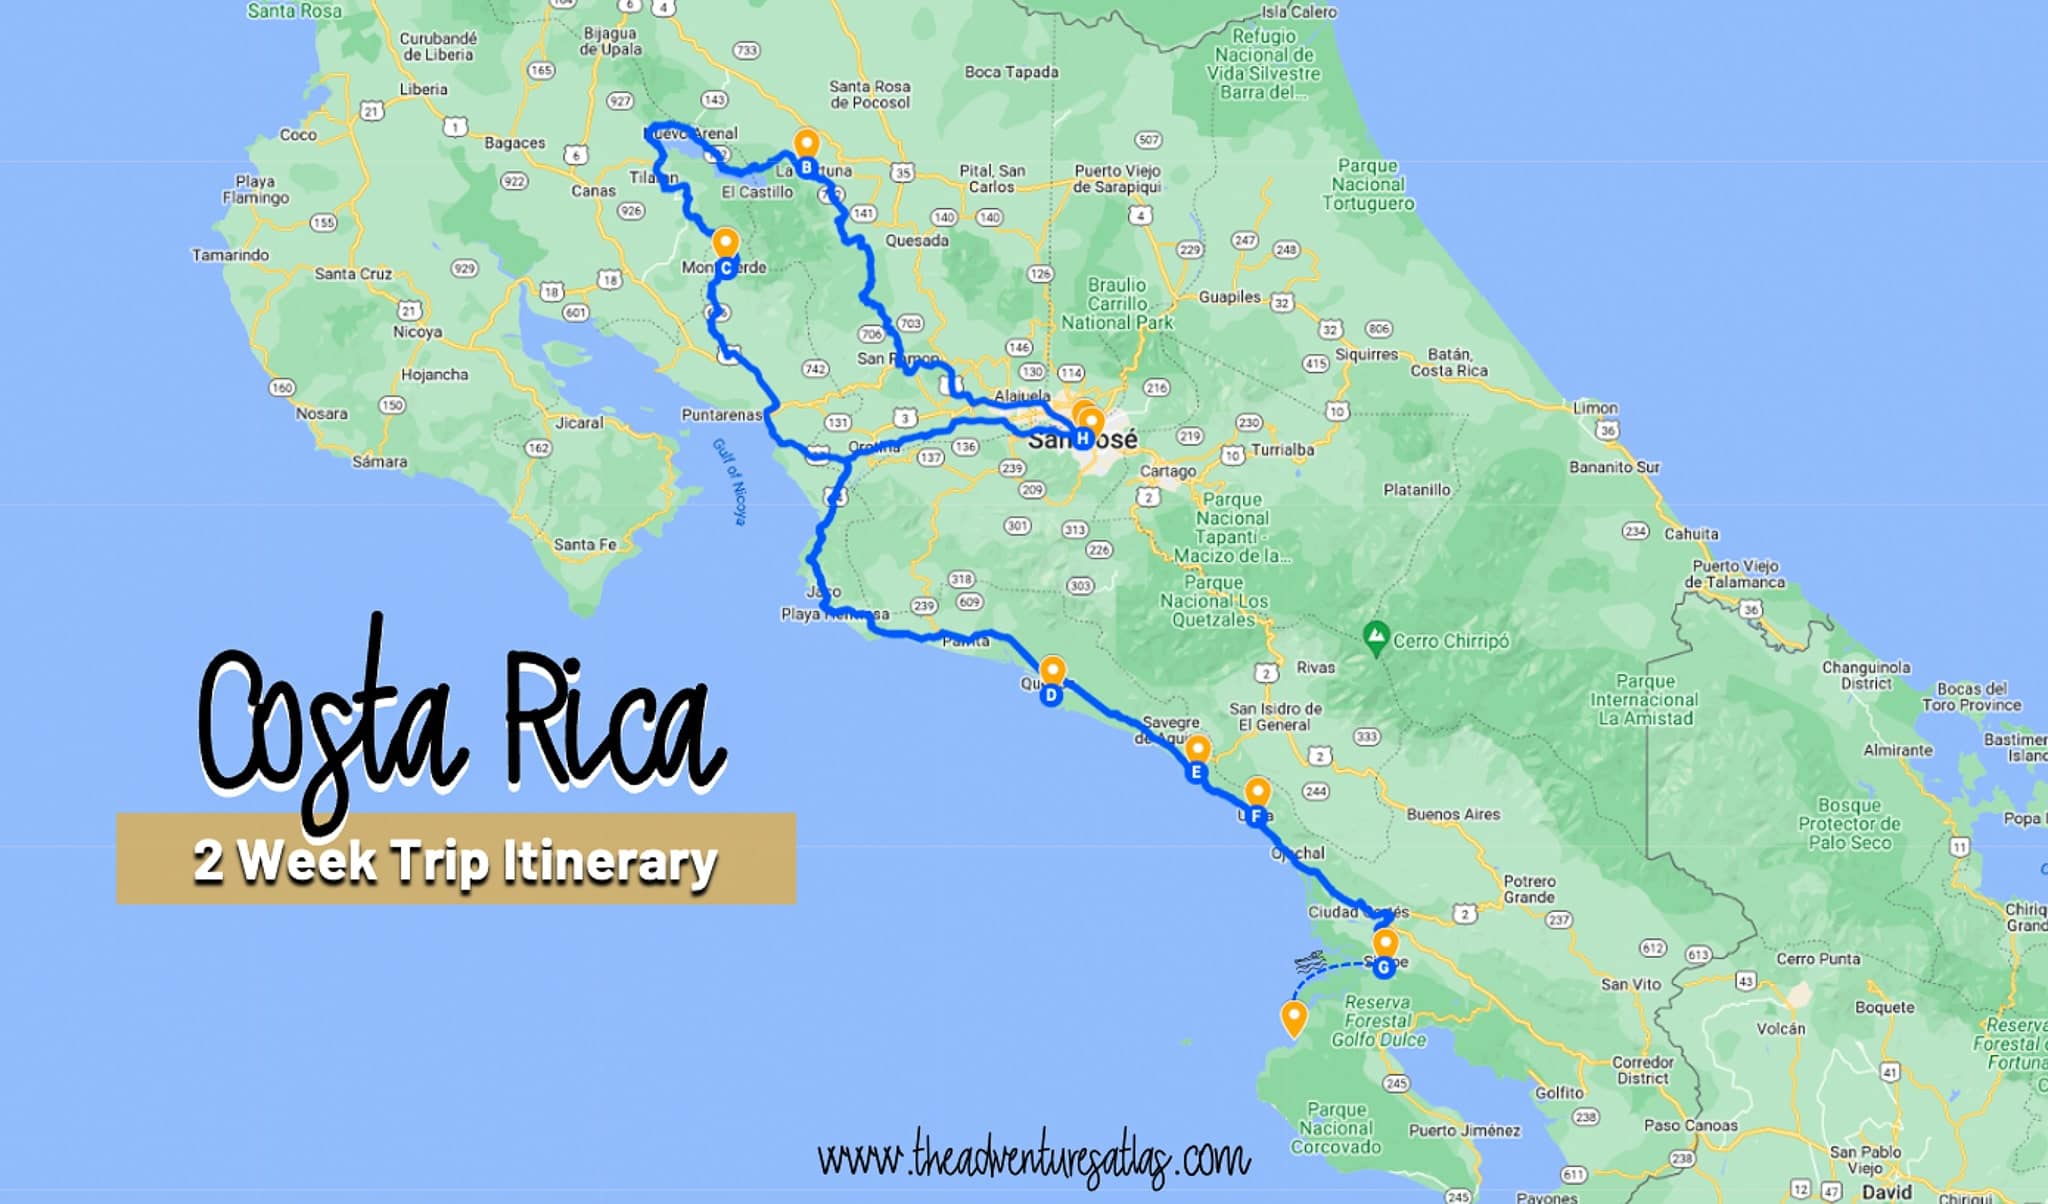 A road trip itinerary for spending 2 weeks in Costa Rica